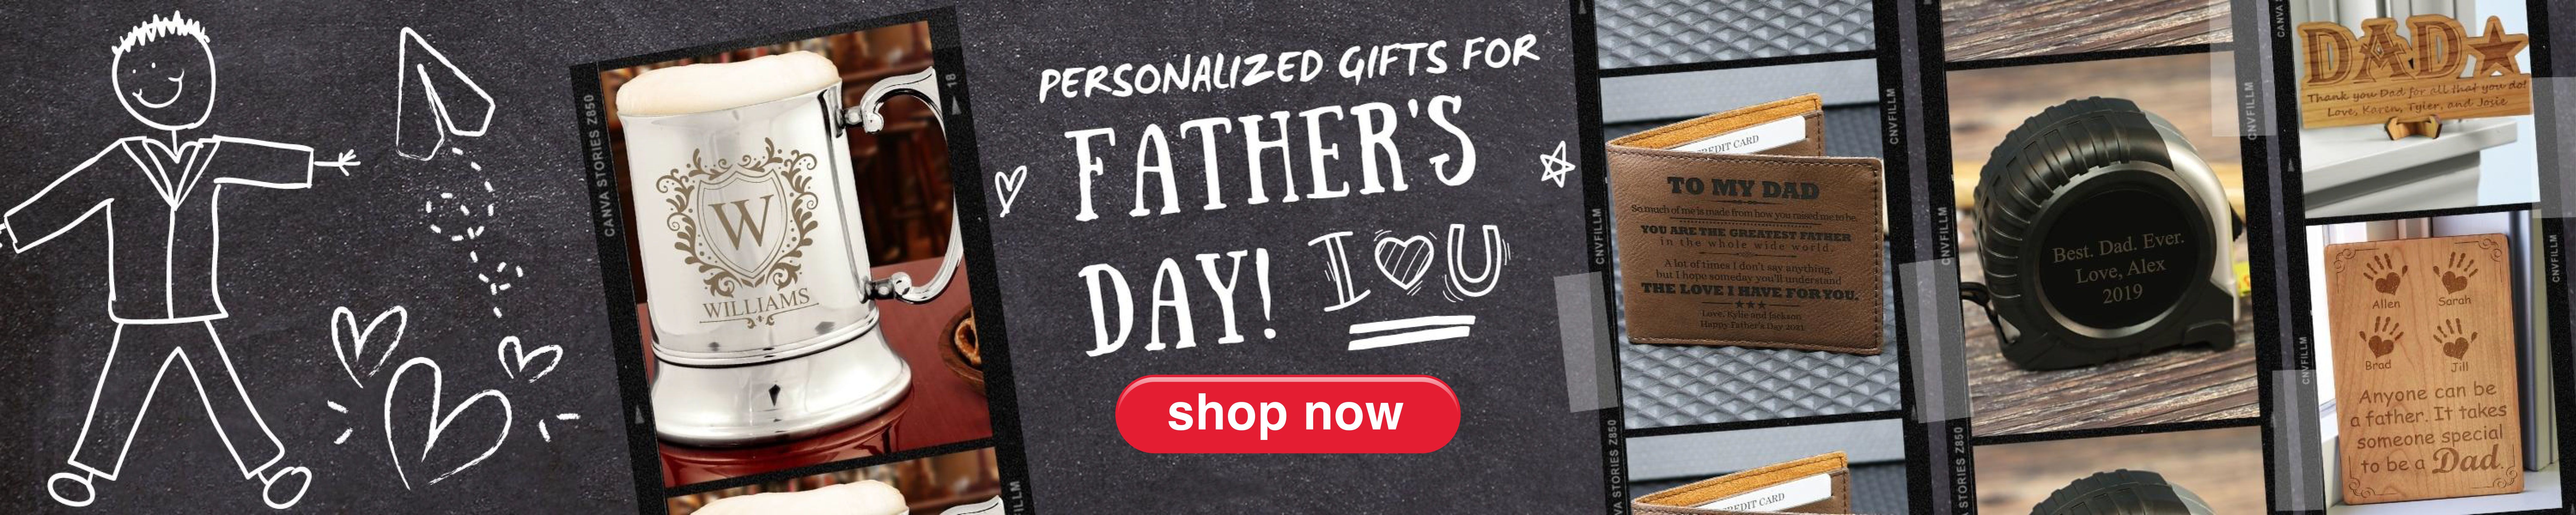 Personalized Father's Day Gifts